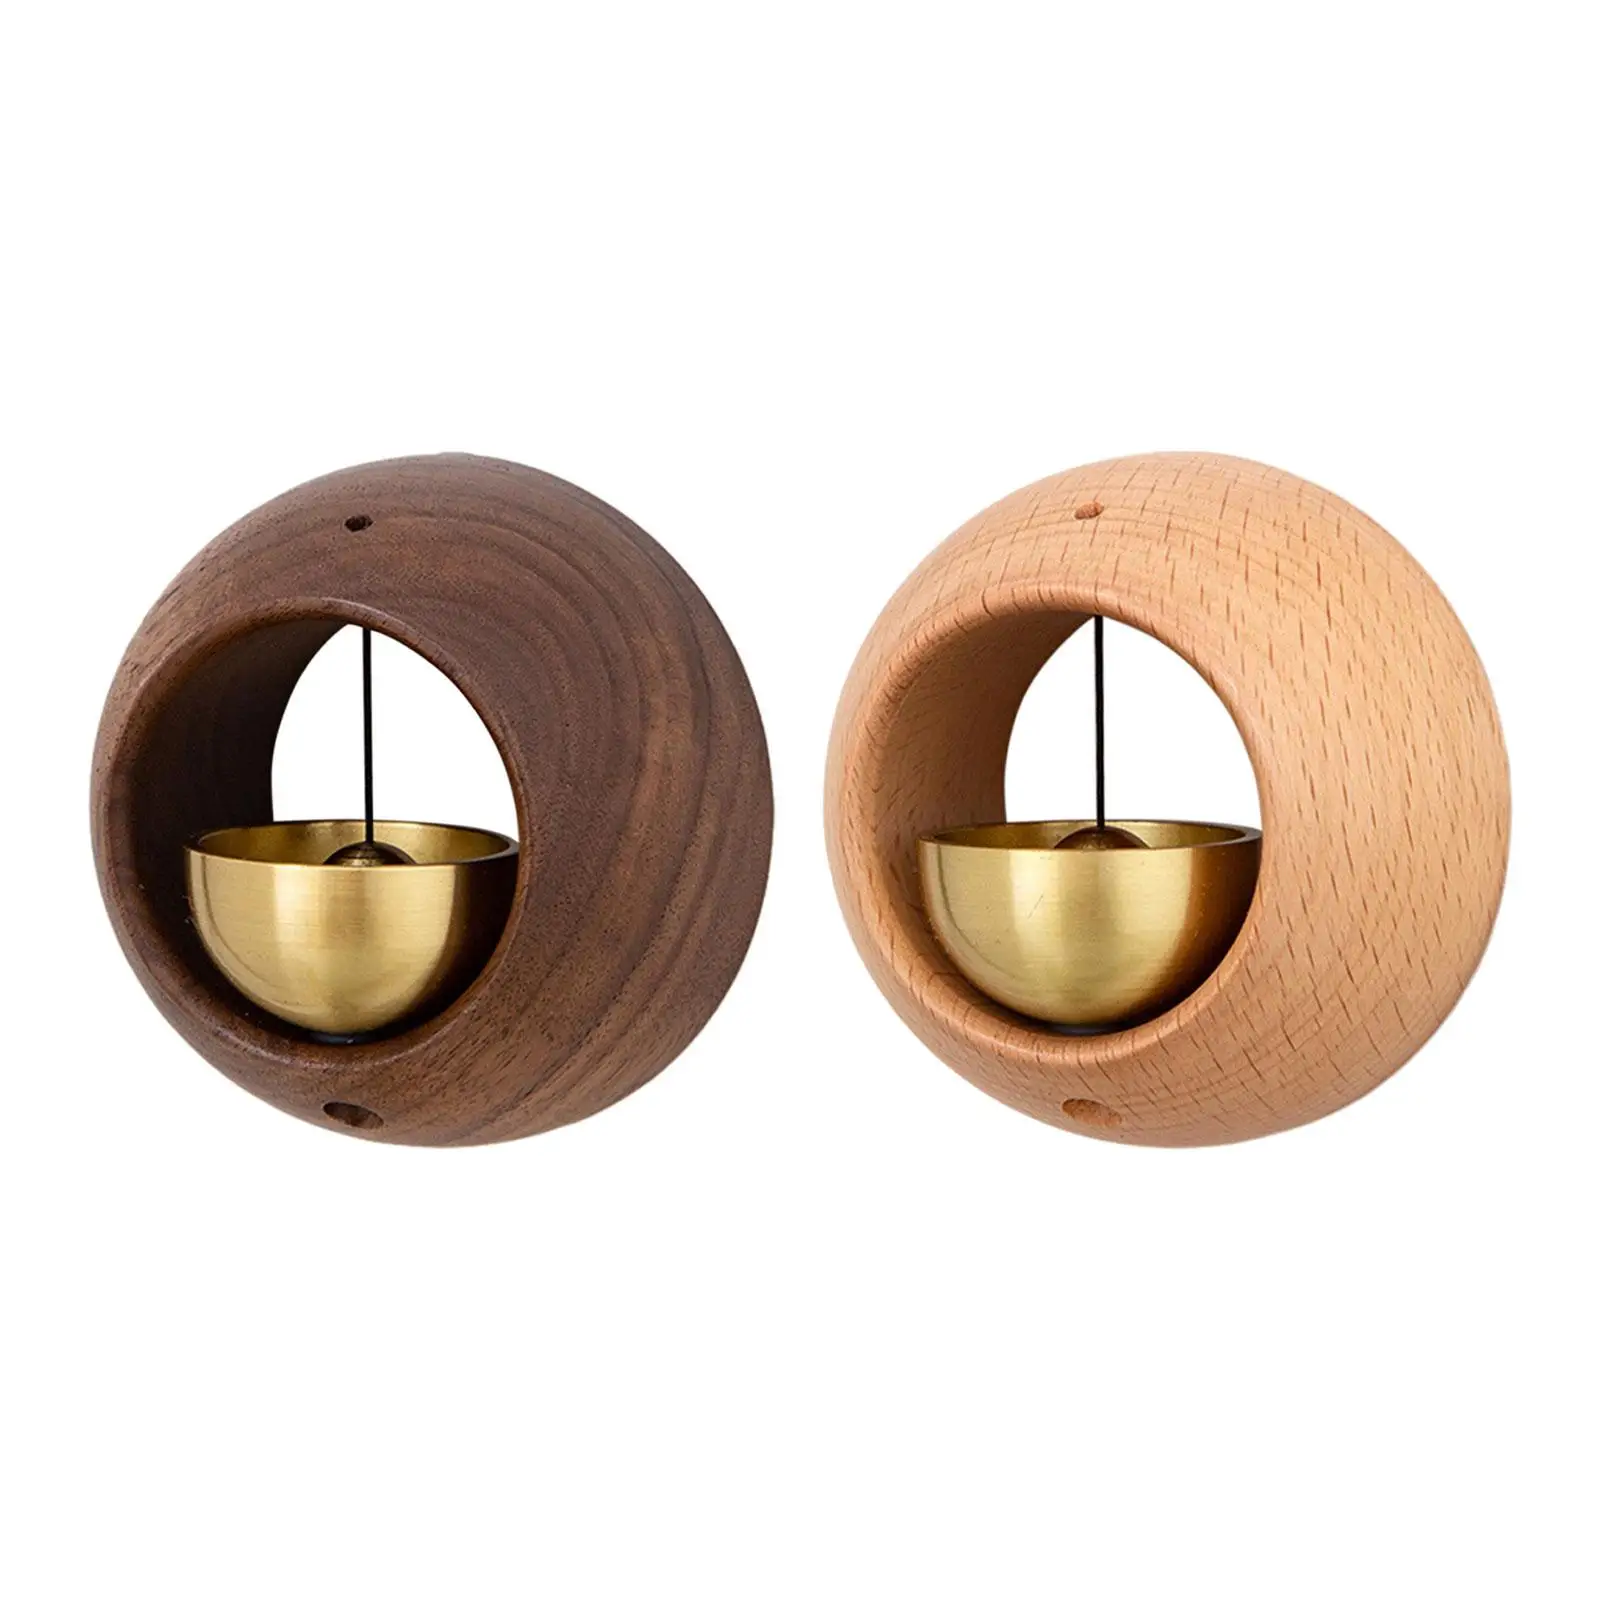 Shopkeepers Bell Welcome Wind Chime Round Small Decorative Wooden Door Bell Doorbell Ornament for Backyard Office Fridge Barn